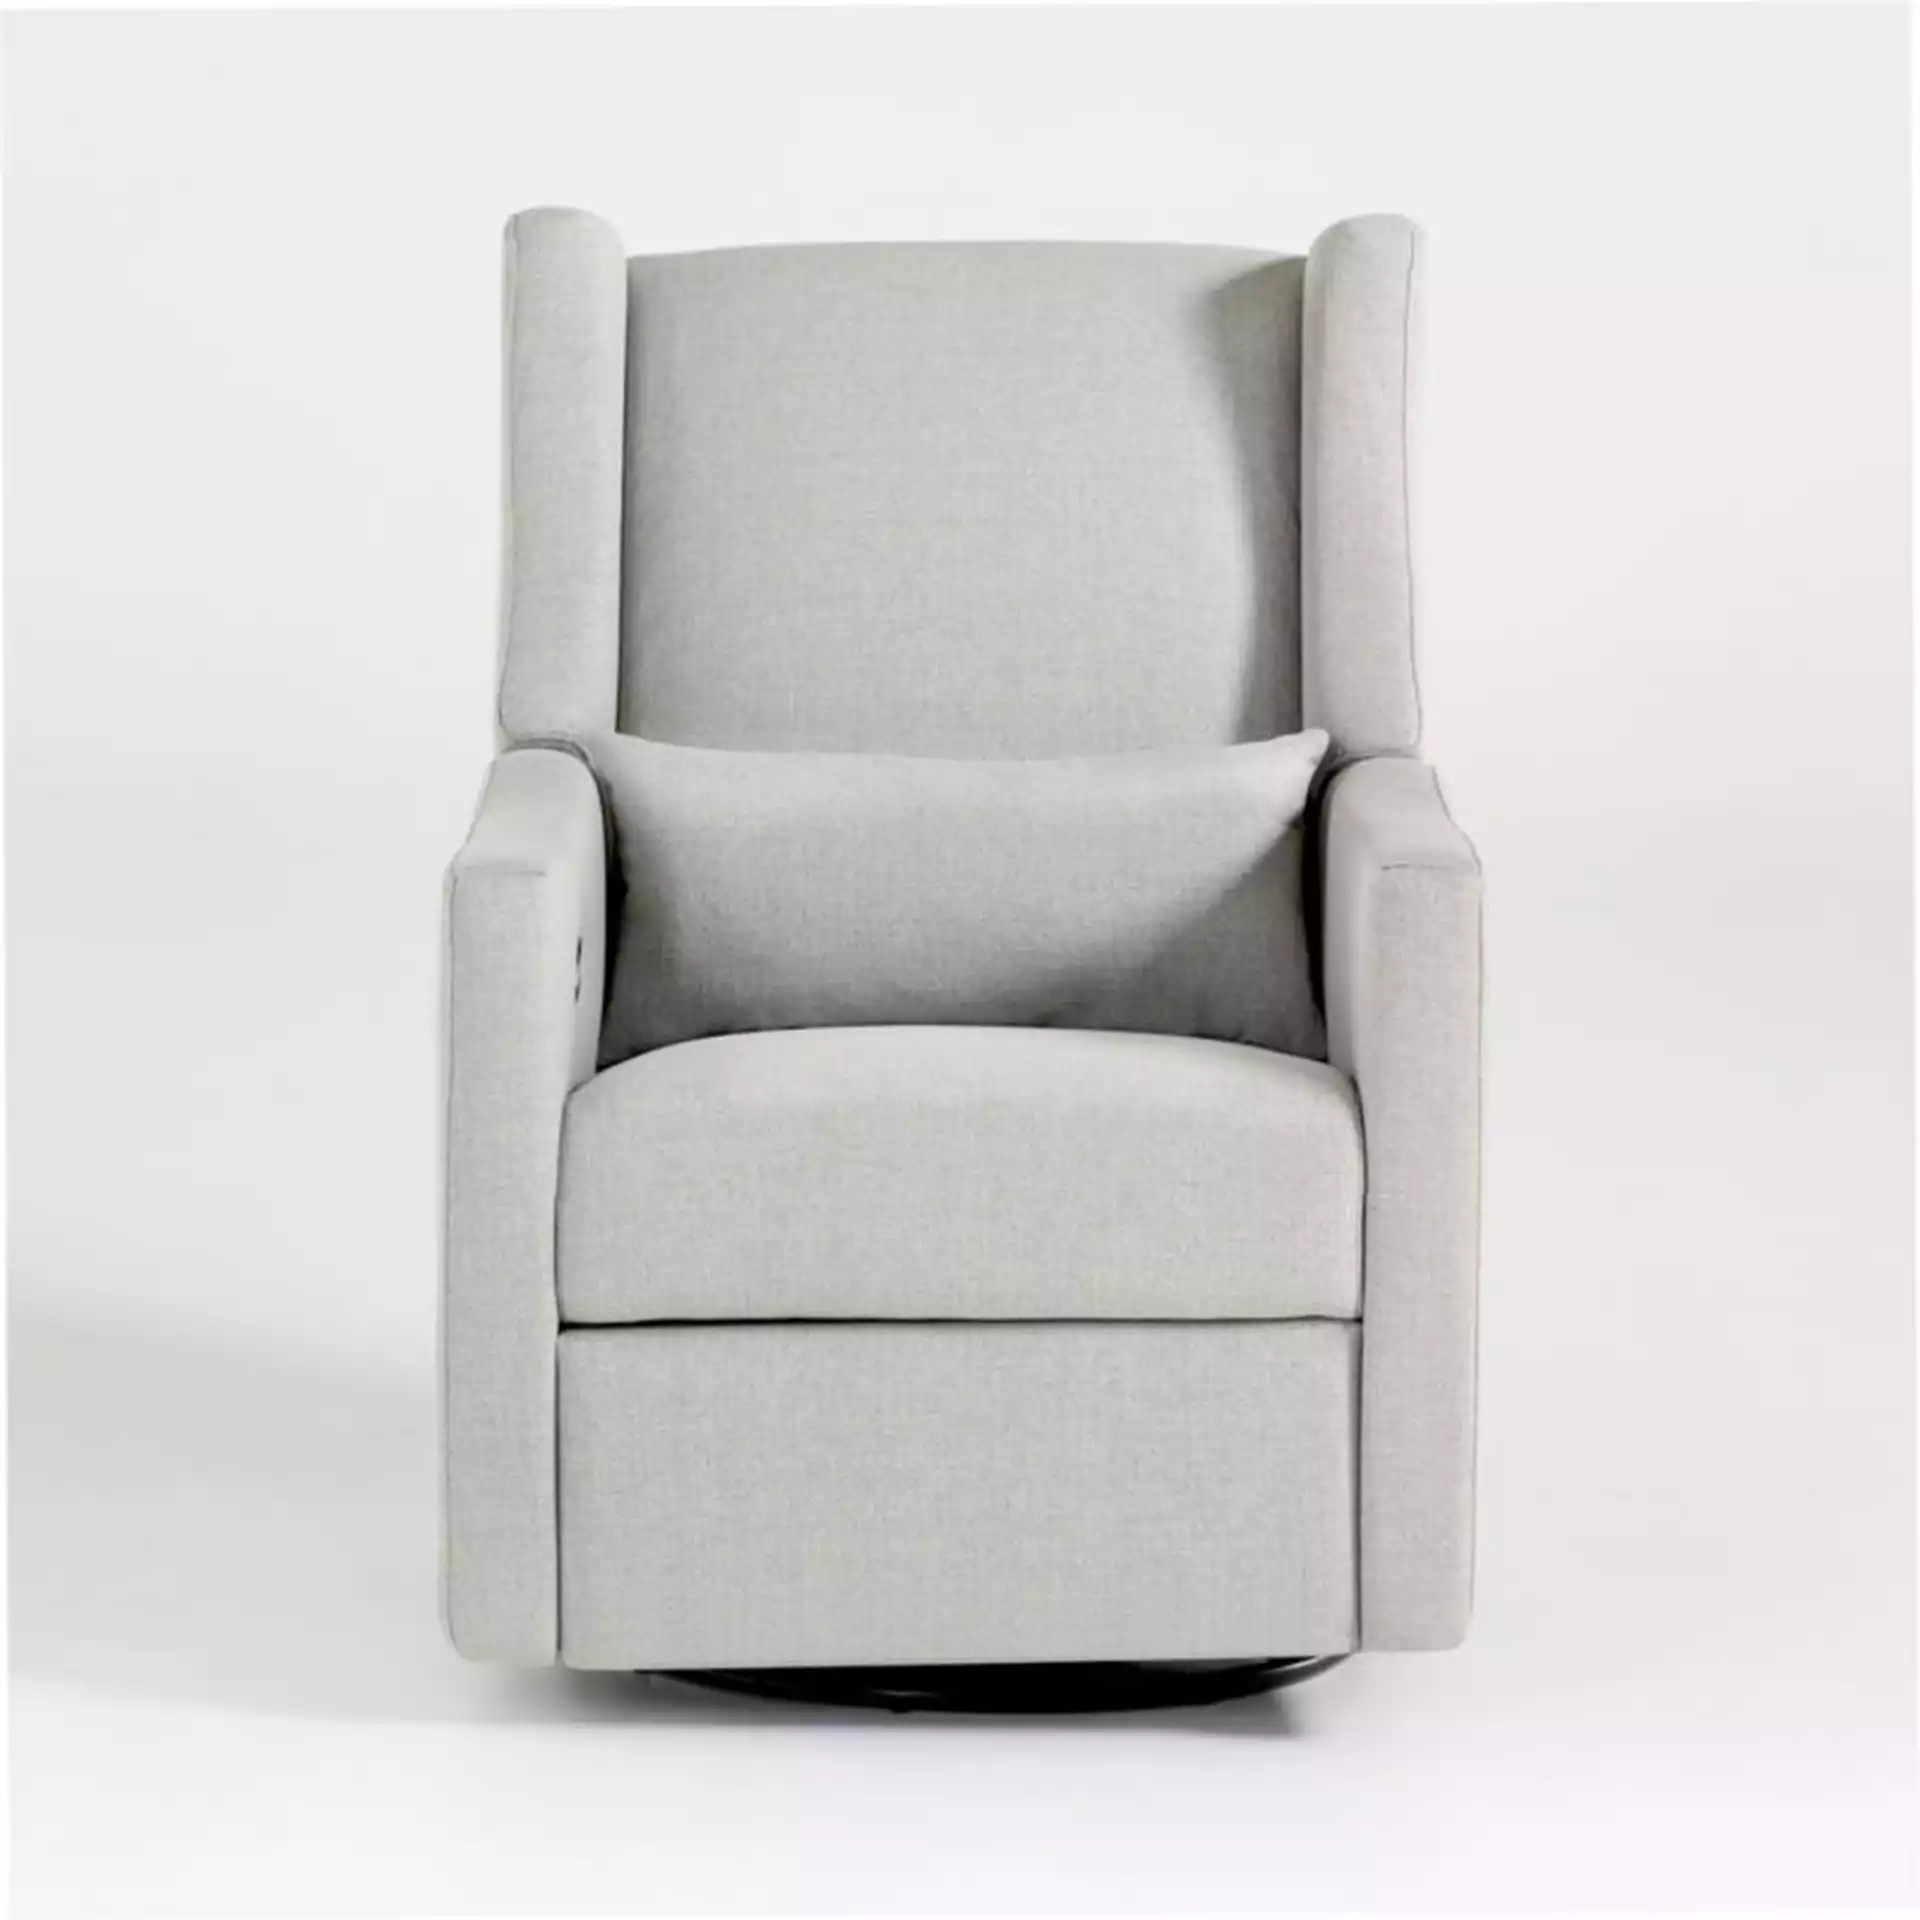 Babyletto Kiwi Gray Power Recliner in Eco-Performance Fabric, Twill